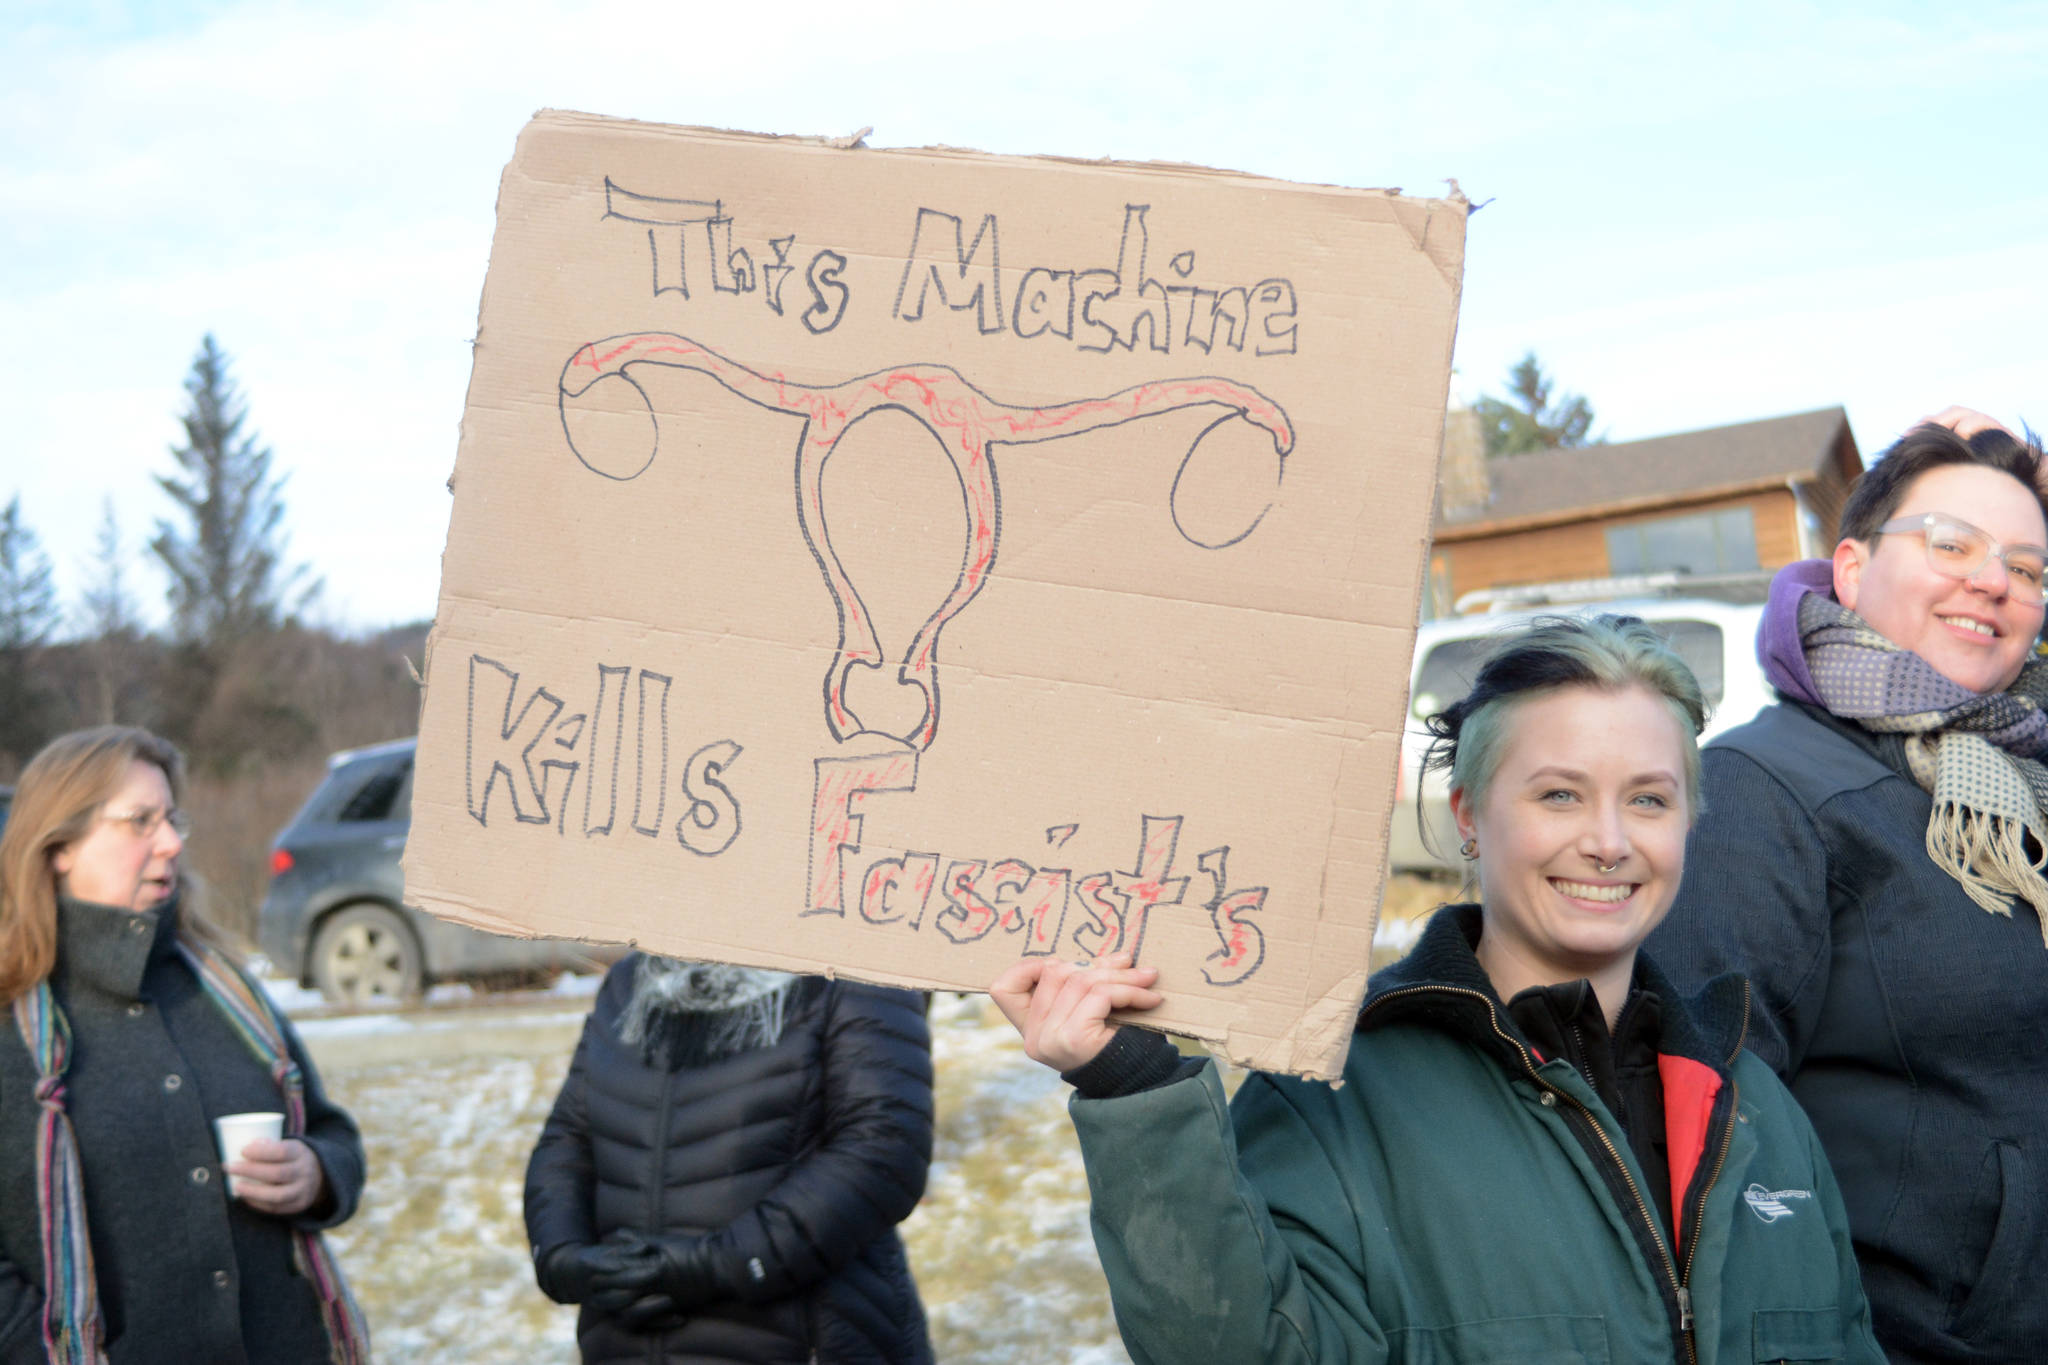 Ariel Gingrich holds a sign reading “This machine kills fascists” with a drawing of a woman’s reproductive system in the Homer March for Women on Saturday. The sign is a reference to a sticker musician Woody Guthrie put on his guitar in 1941 during World War II. About 700 people walked in the march along Pioneer Avenue on Jan. 20, 2018, in Homer, Alaska. The line of marchers extended from Main Street to Kachemak Way. (Photo by Michael Armstrong/Homer News)